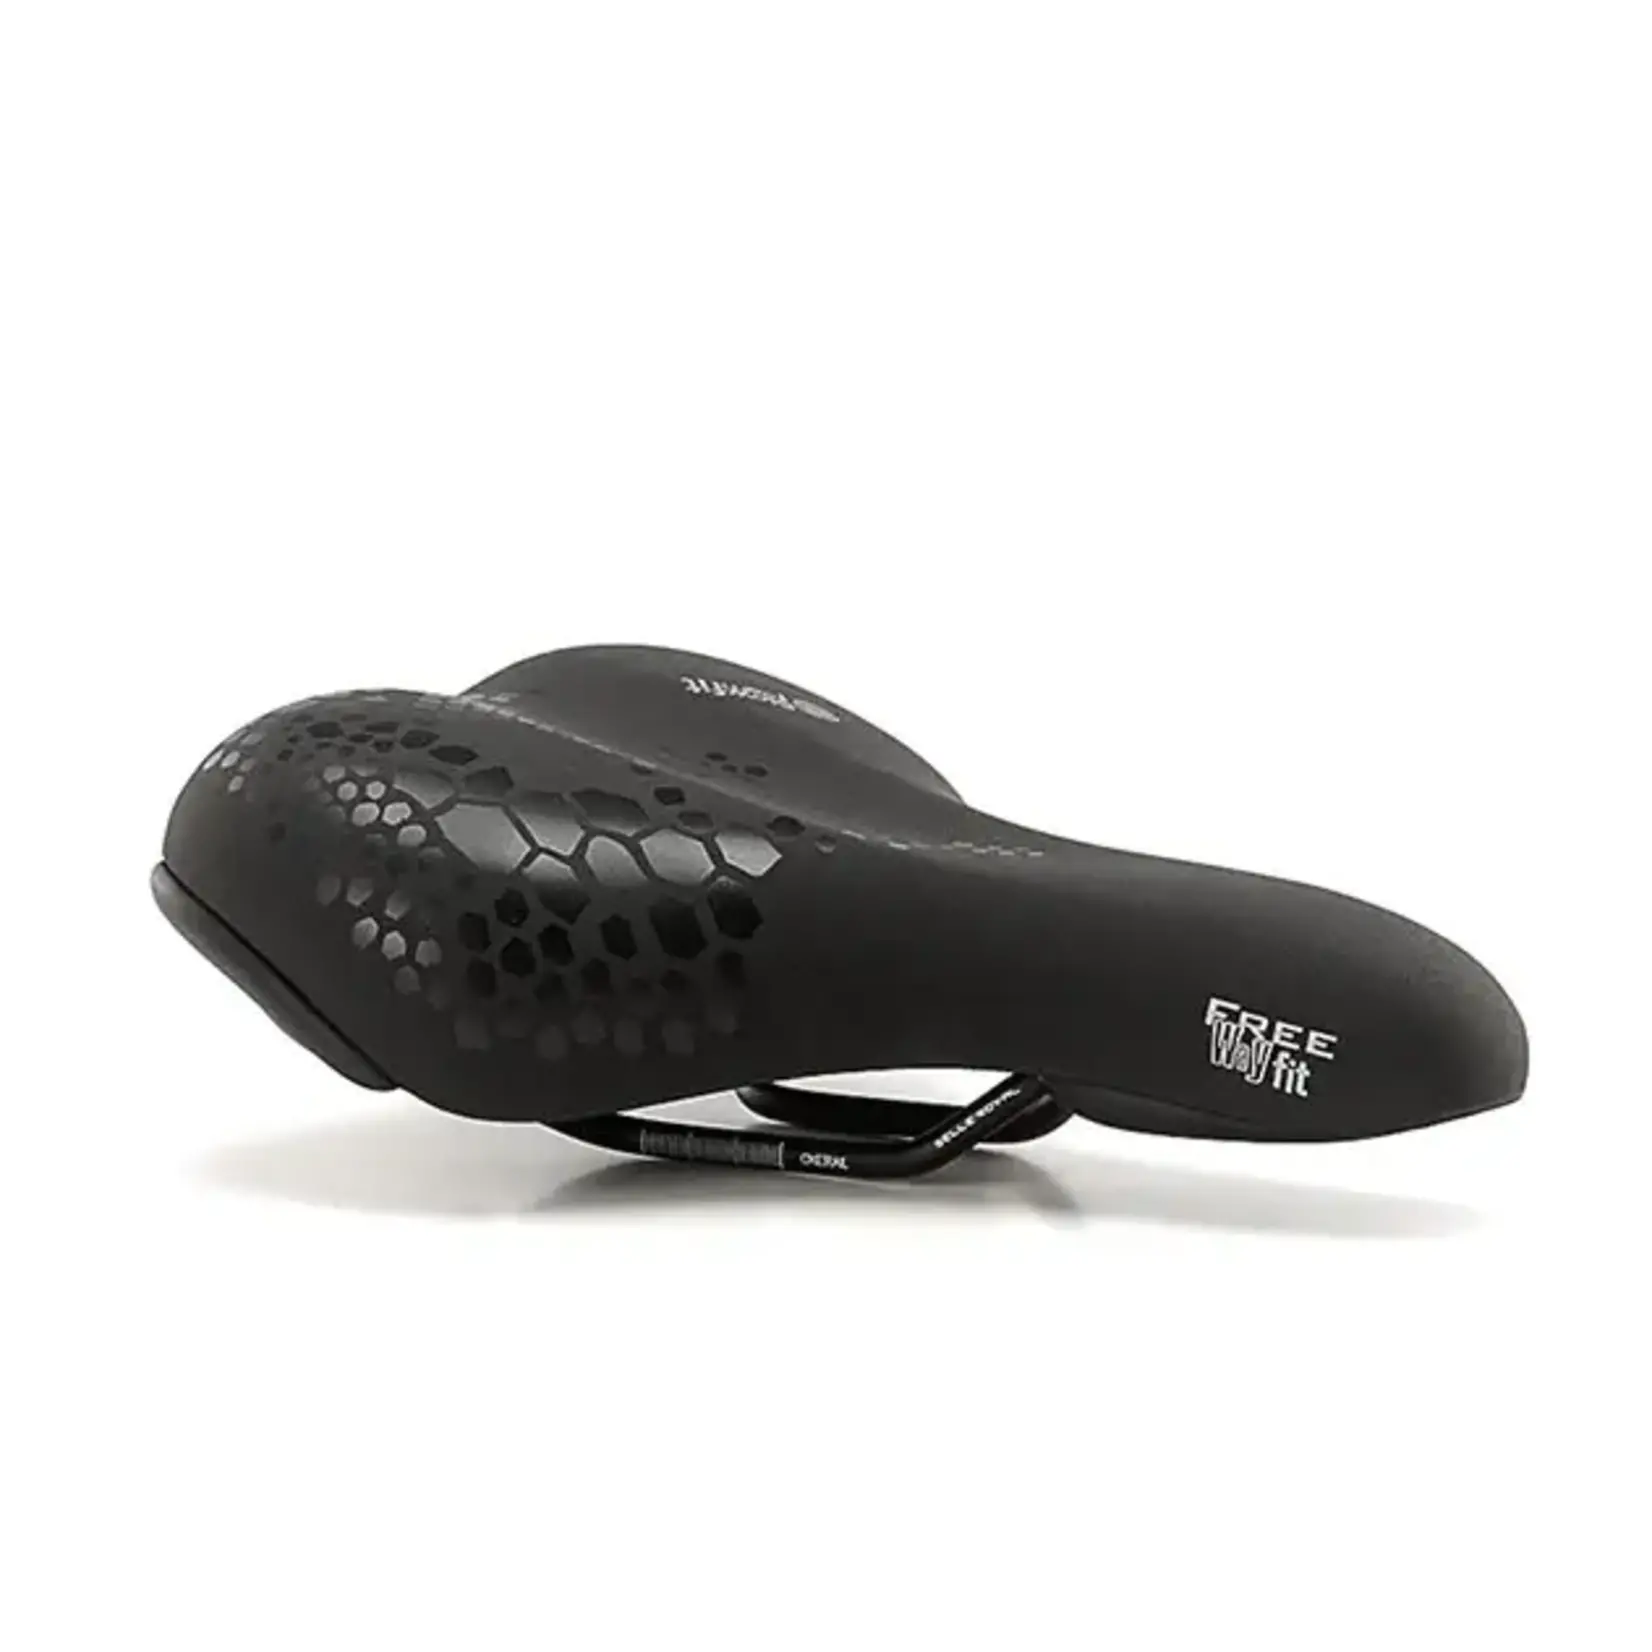 Selle Royal Selle Royal, Women's Freeway Fit Moderate, Saddle, Soft Touch, Black